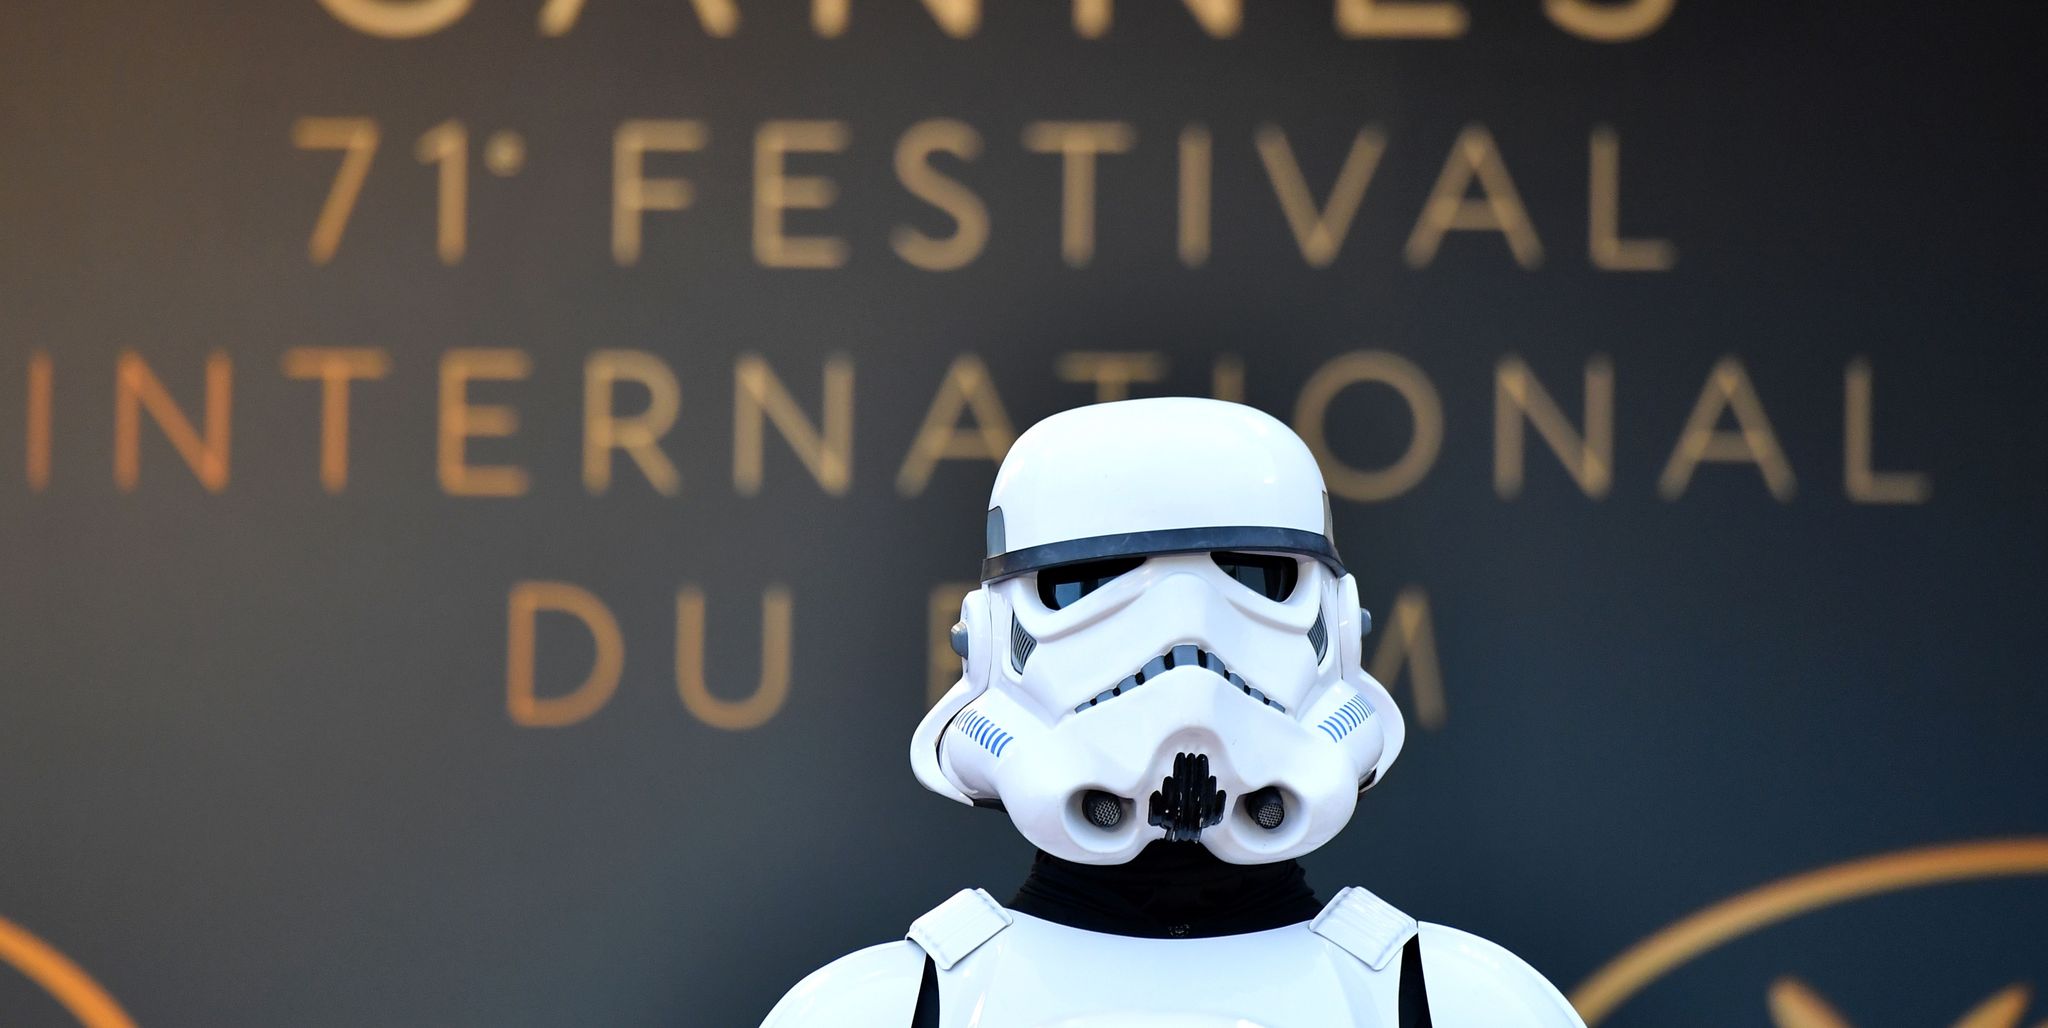 Solo. A Star Wars Story a Cannes